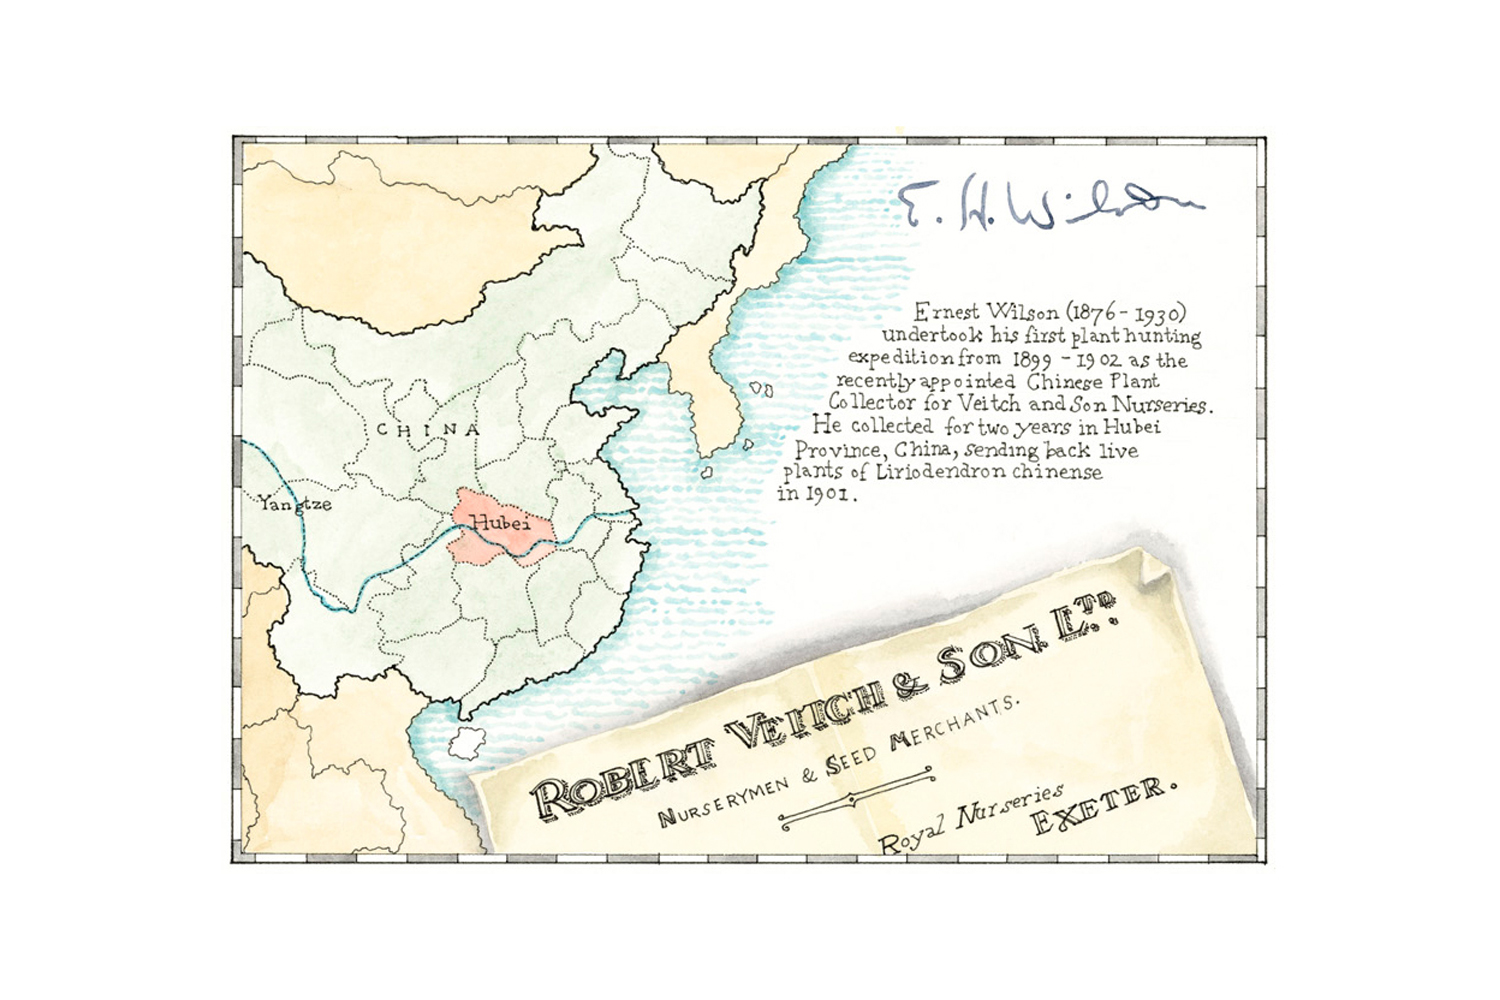 Borde Hill Plant Histories, 2012, pen & ink with watercolour,  map of E. H. Wilson’s plant hunting expedition to China in 1899 - 1902